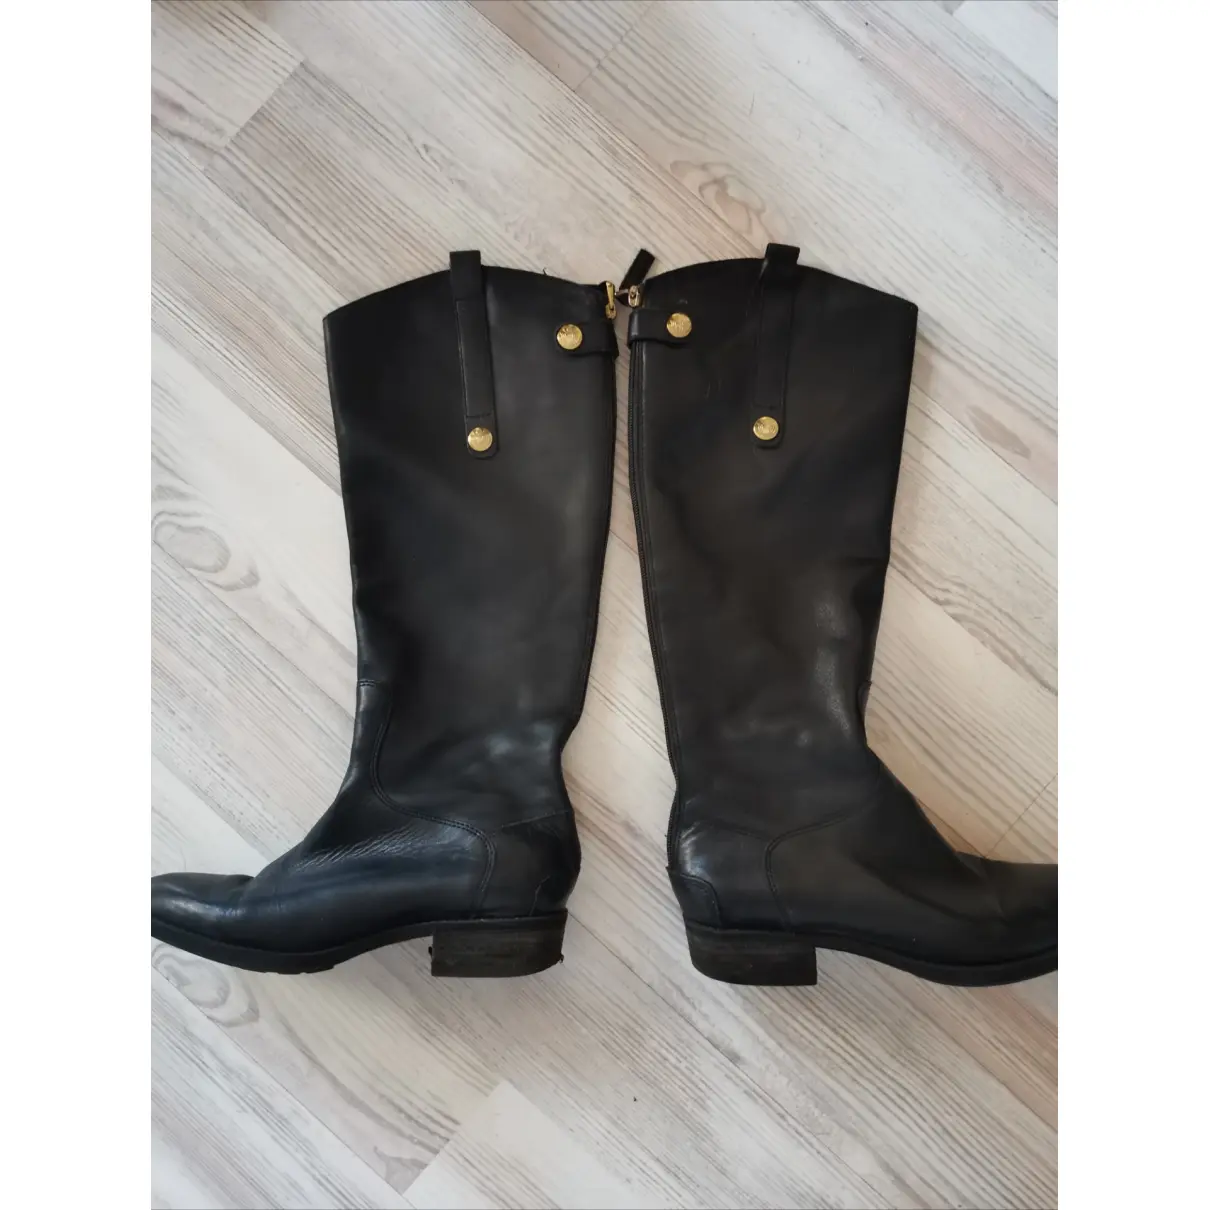 Buy Sam Edelman Leather riding boots online